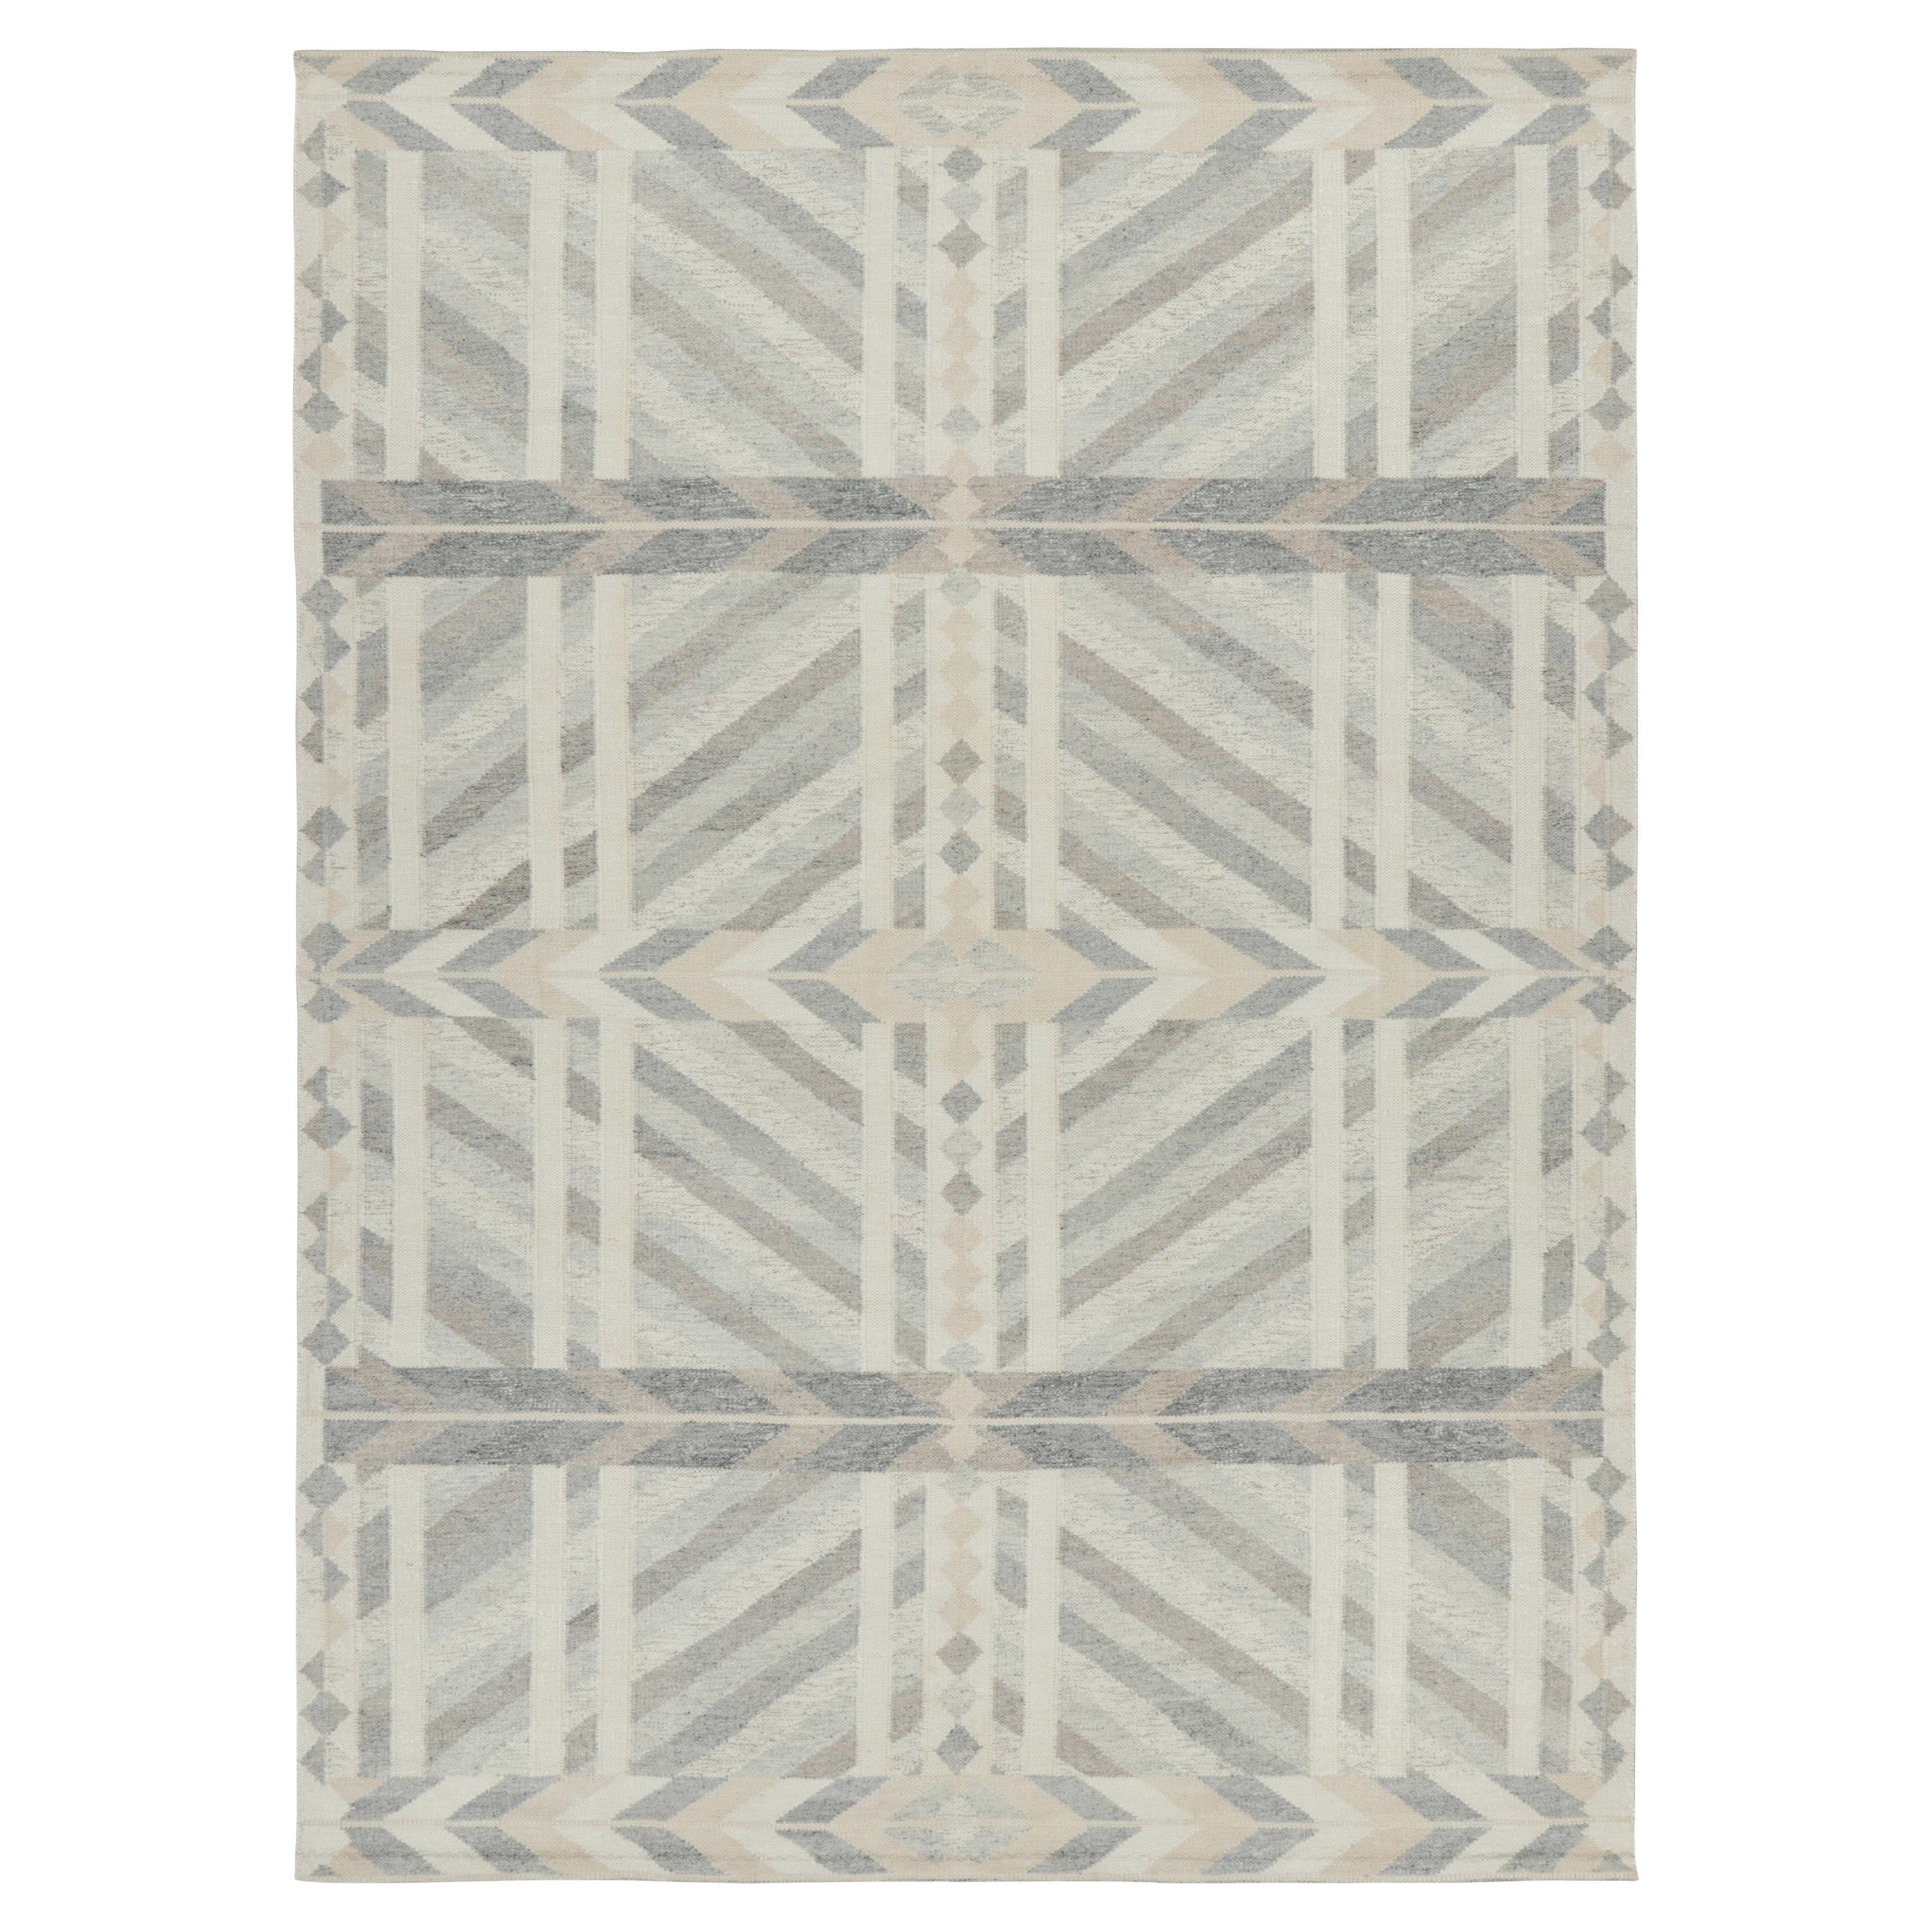 Rug & Kilim’s Scandinavian Style Rug in Gray Beige and White Geometric Patterns